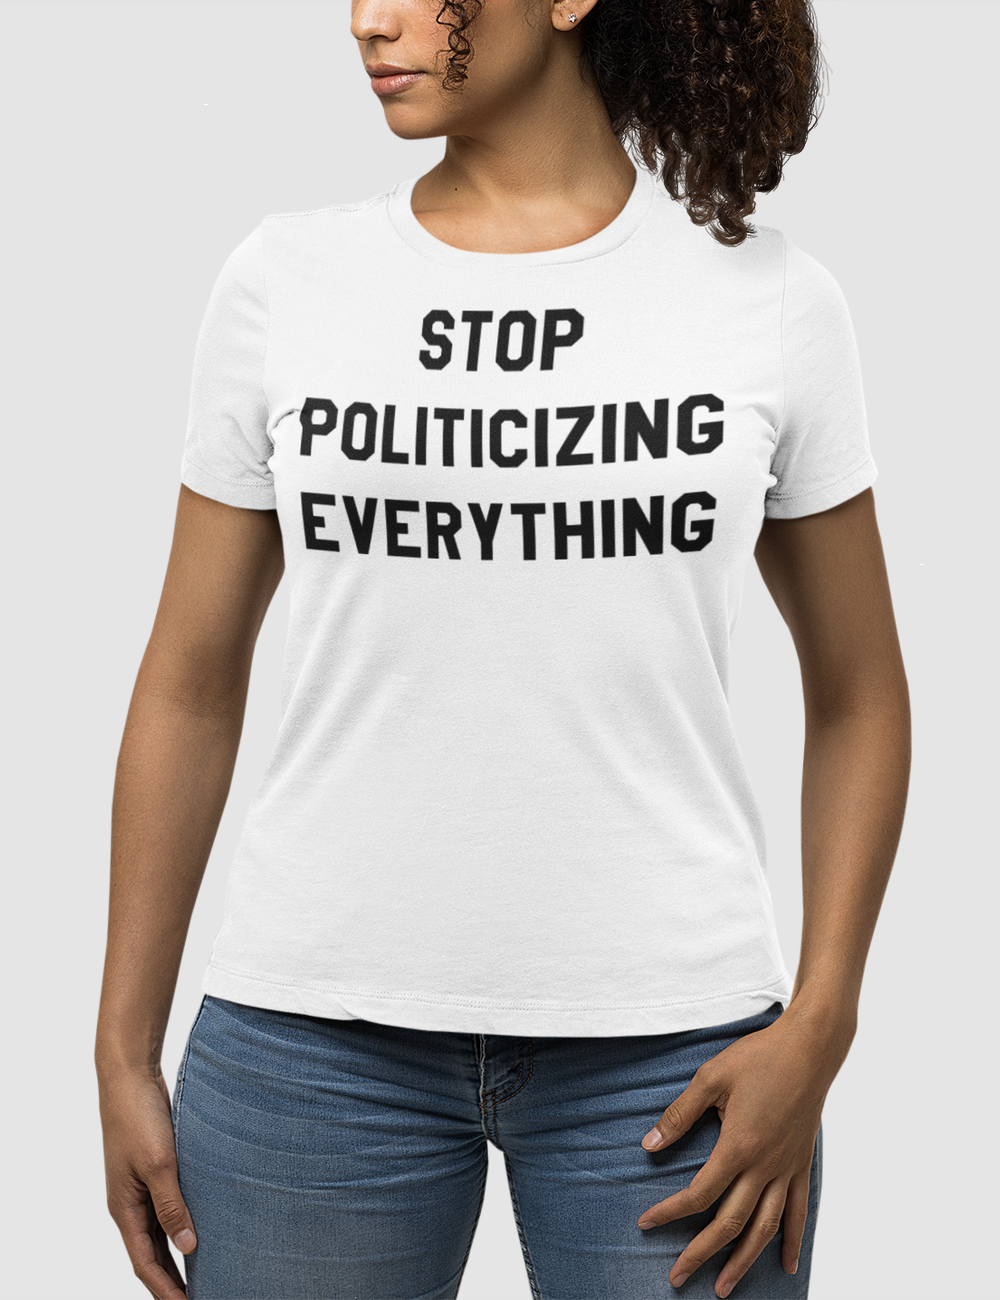 Stop Politicizing Everything | Women's Fitted T-Shirt OniTakai